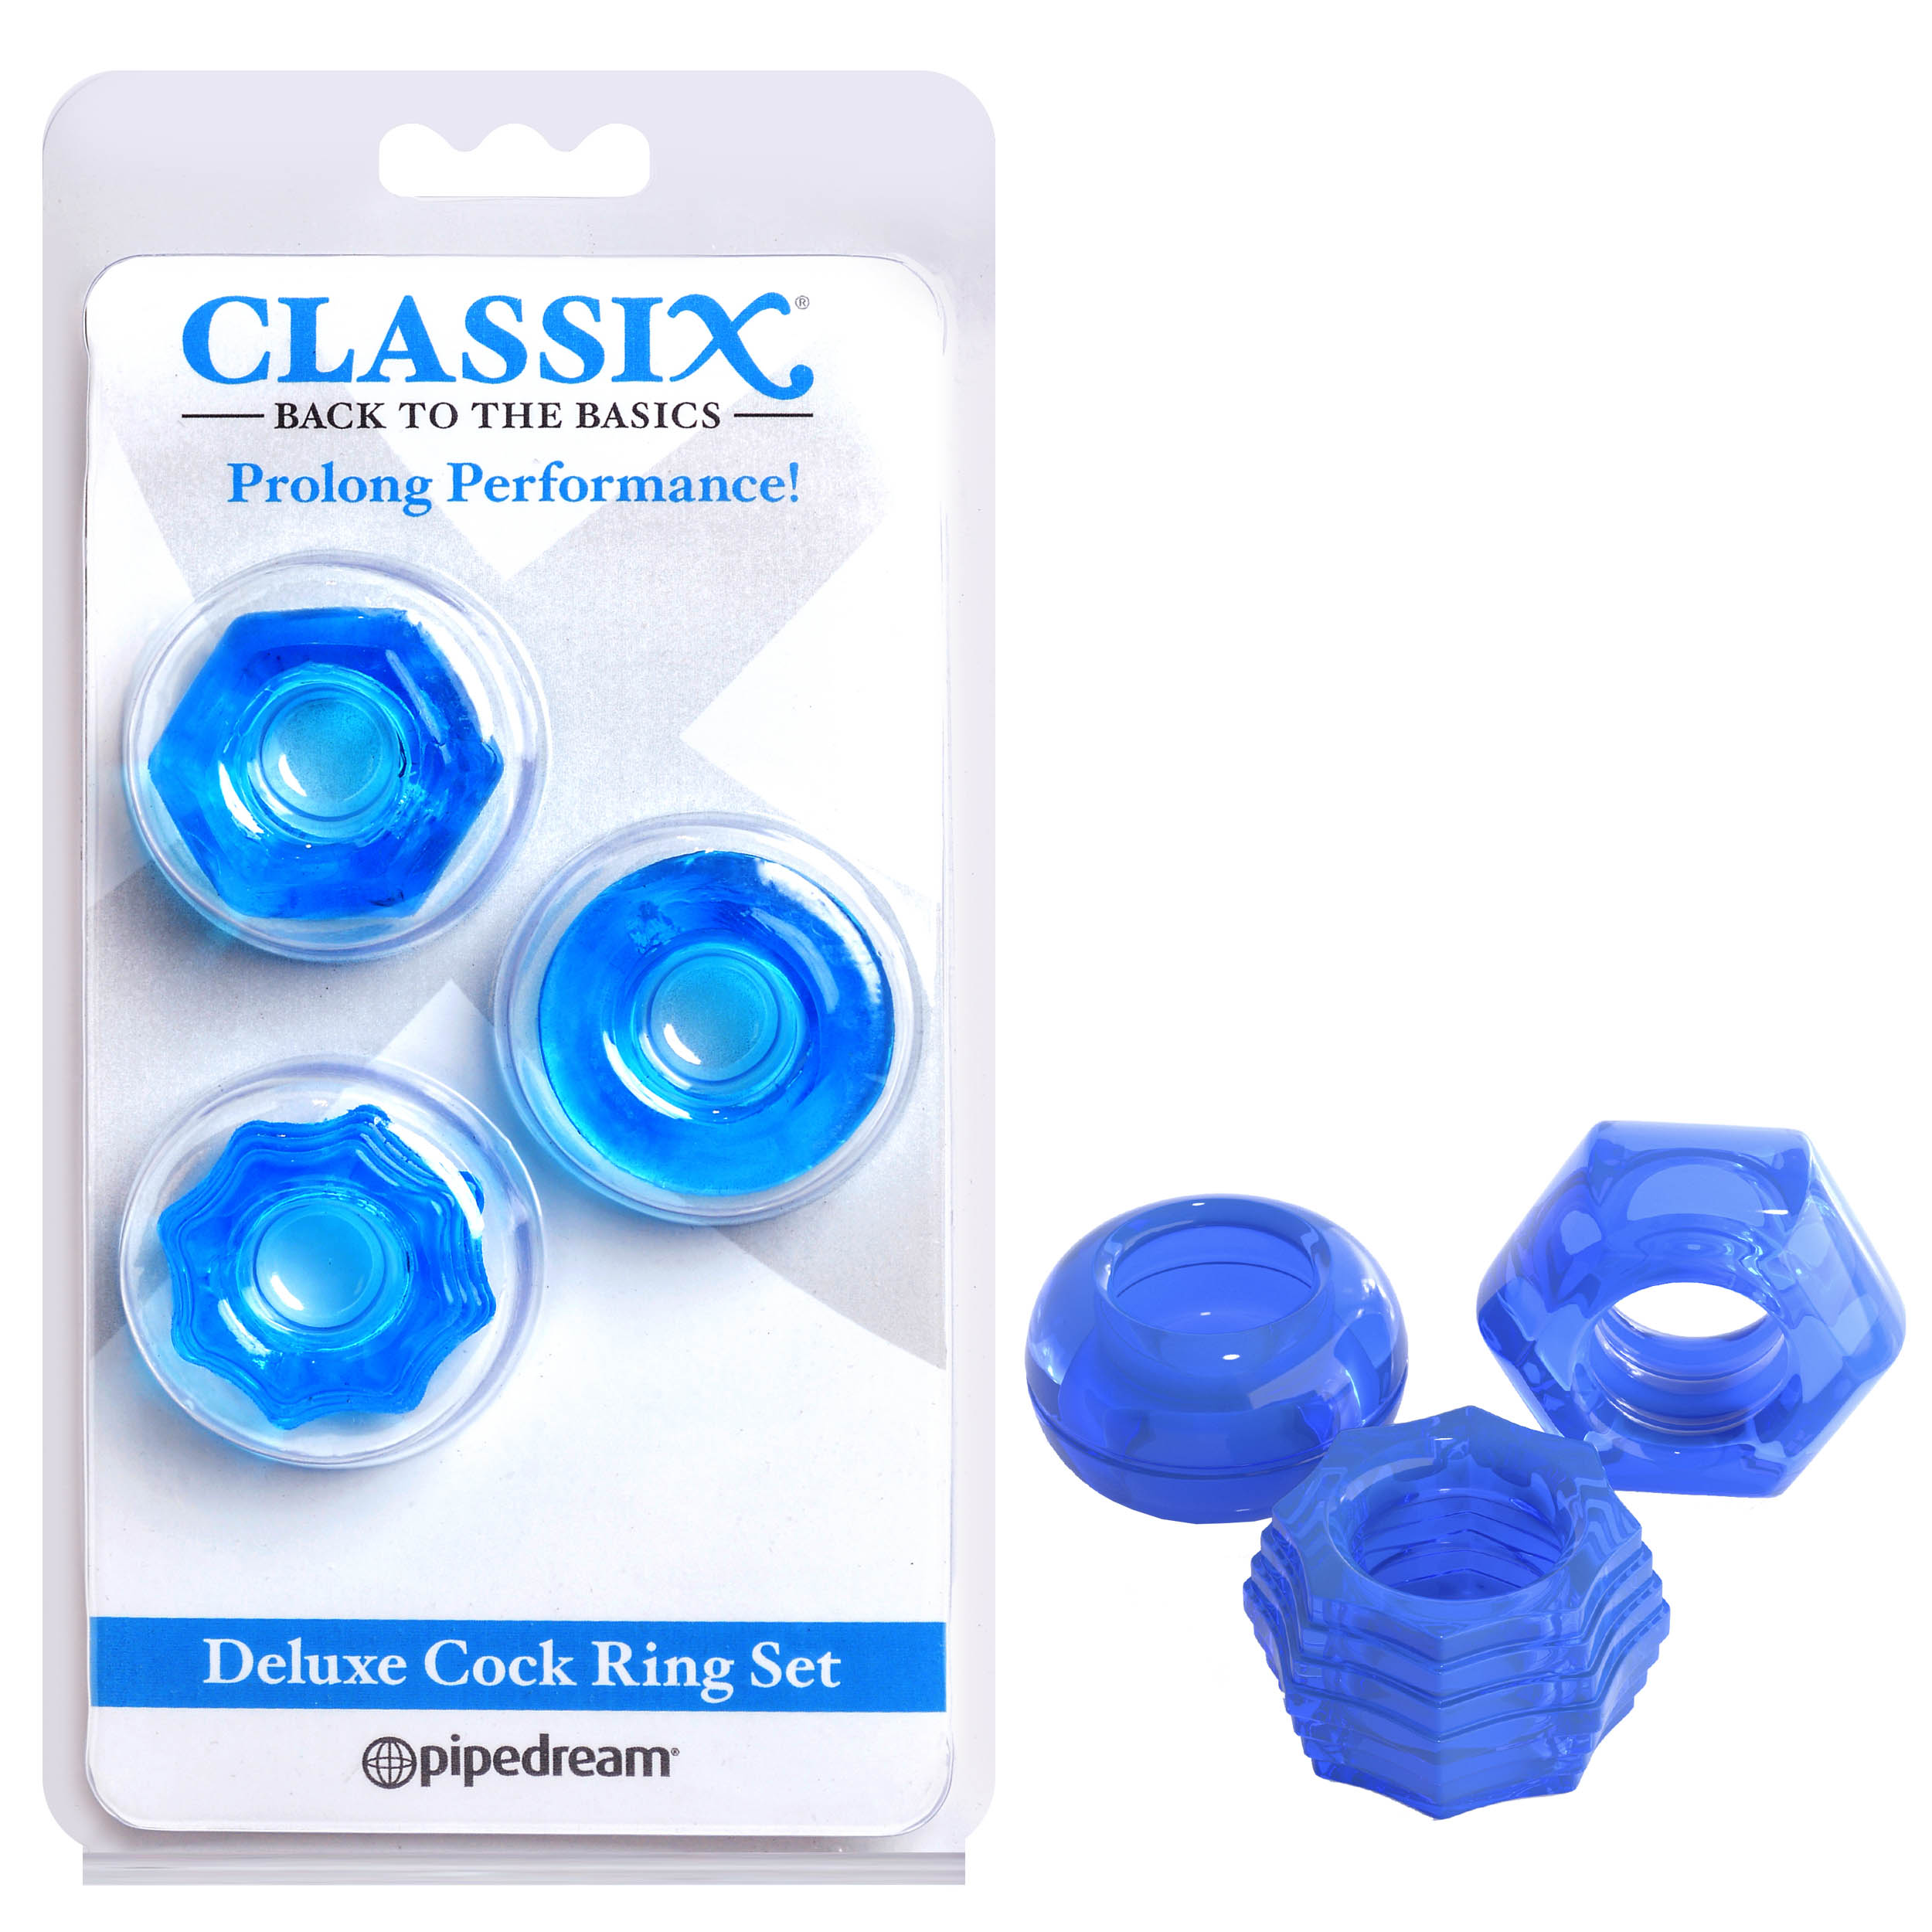 Classix Deluxe Cock Ring Set-(pd1999-14)